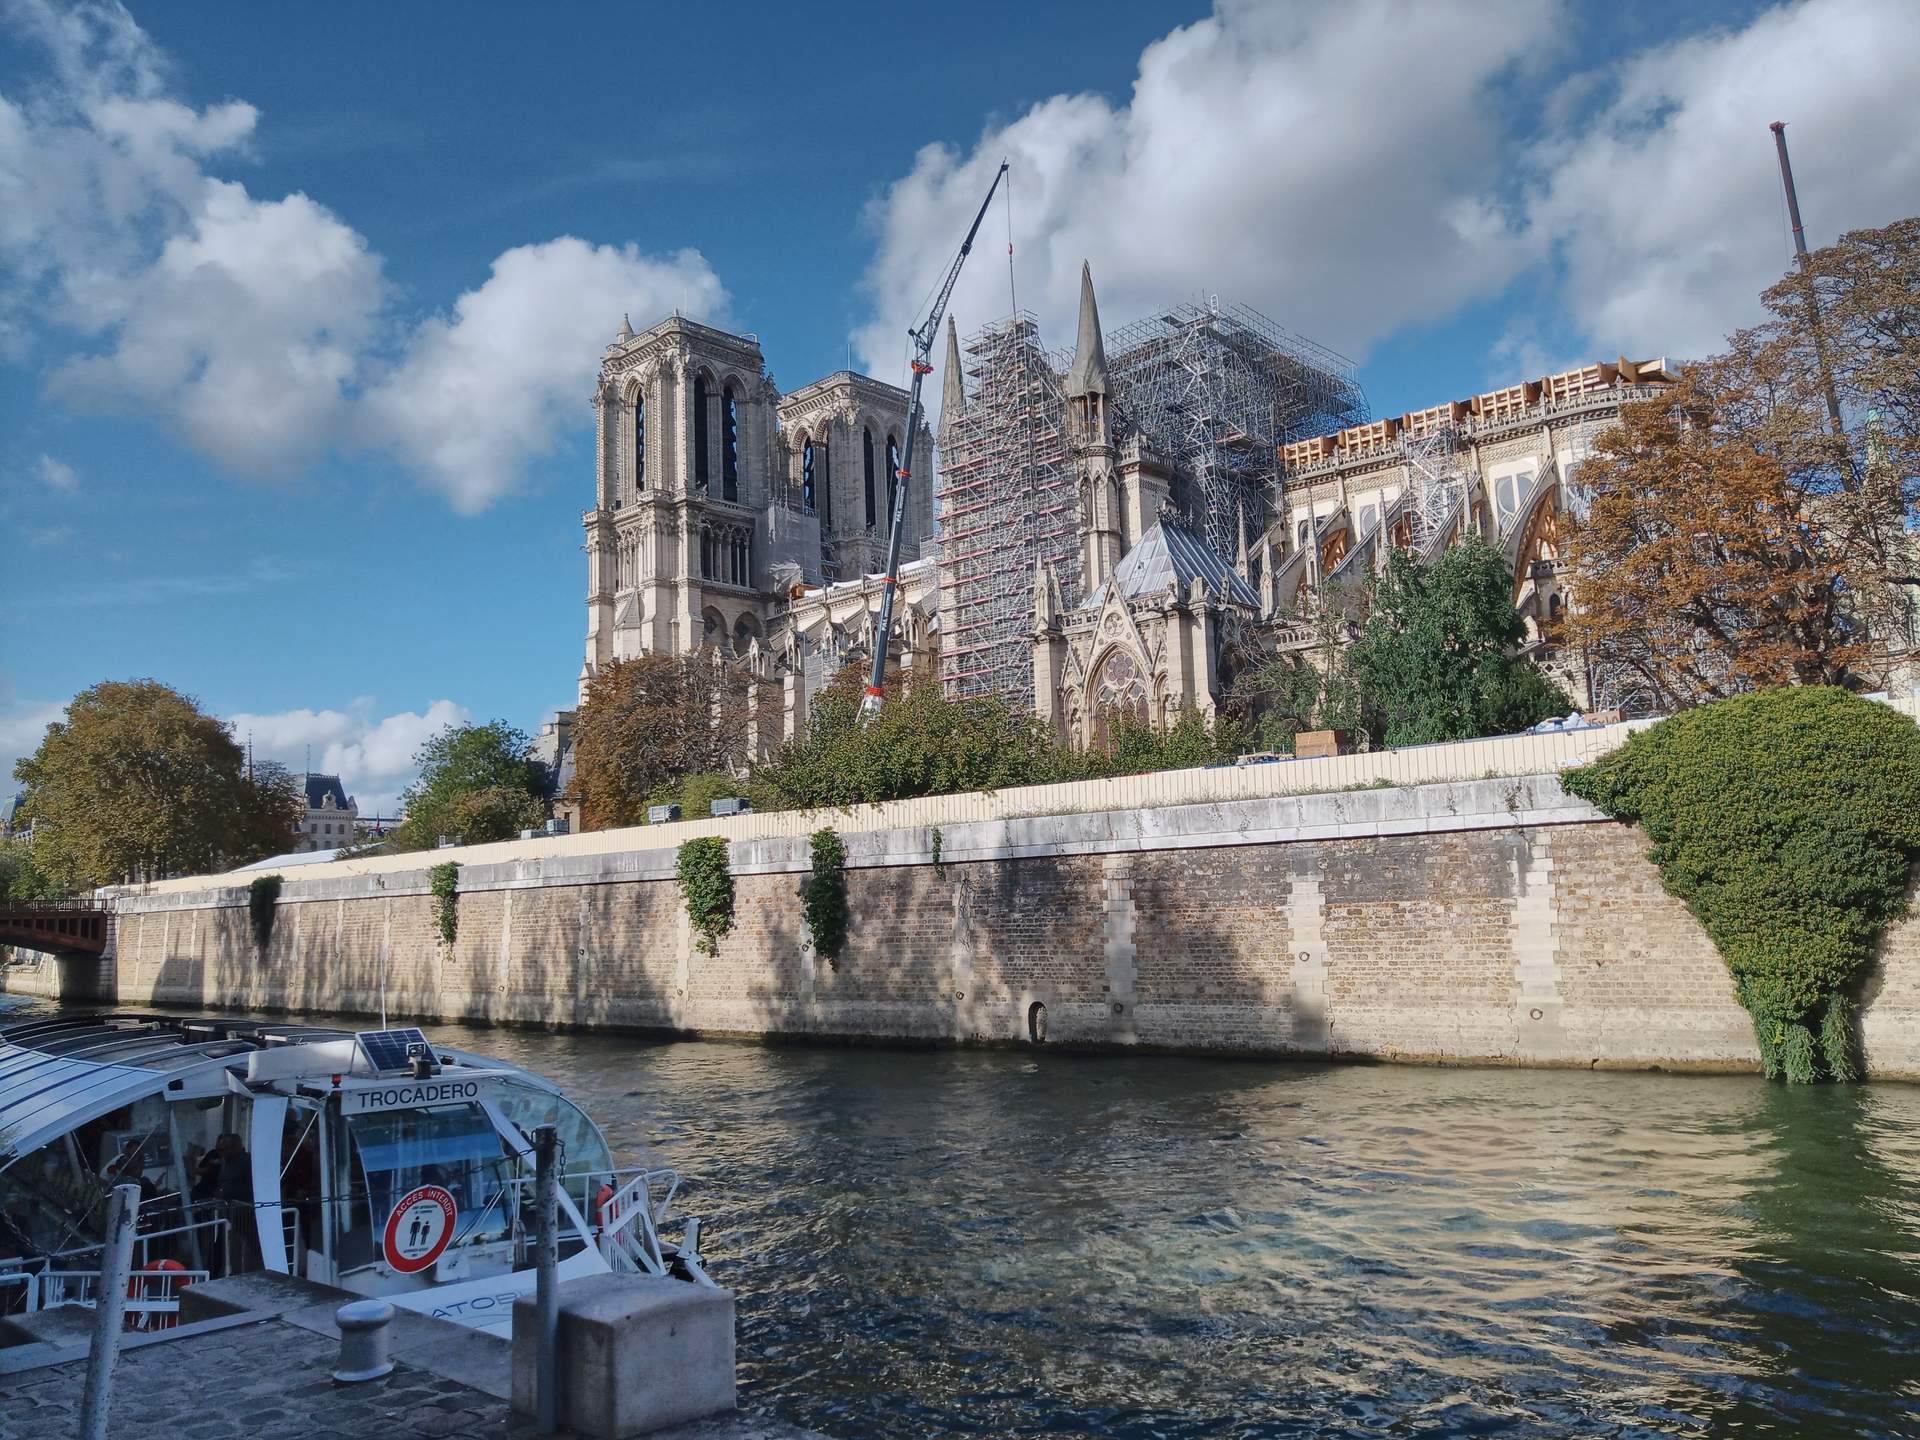 The Notre Dame is under repair for the next few years due to the fire that engulfed its spire in April 2019.